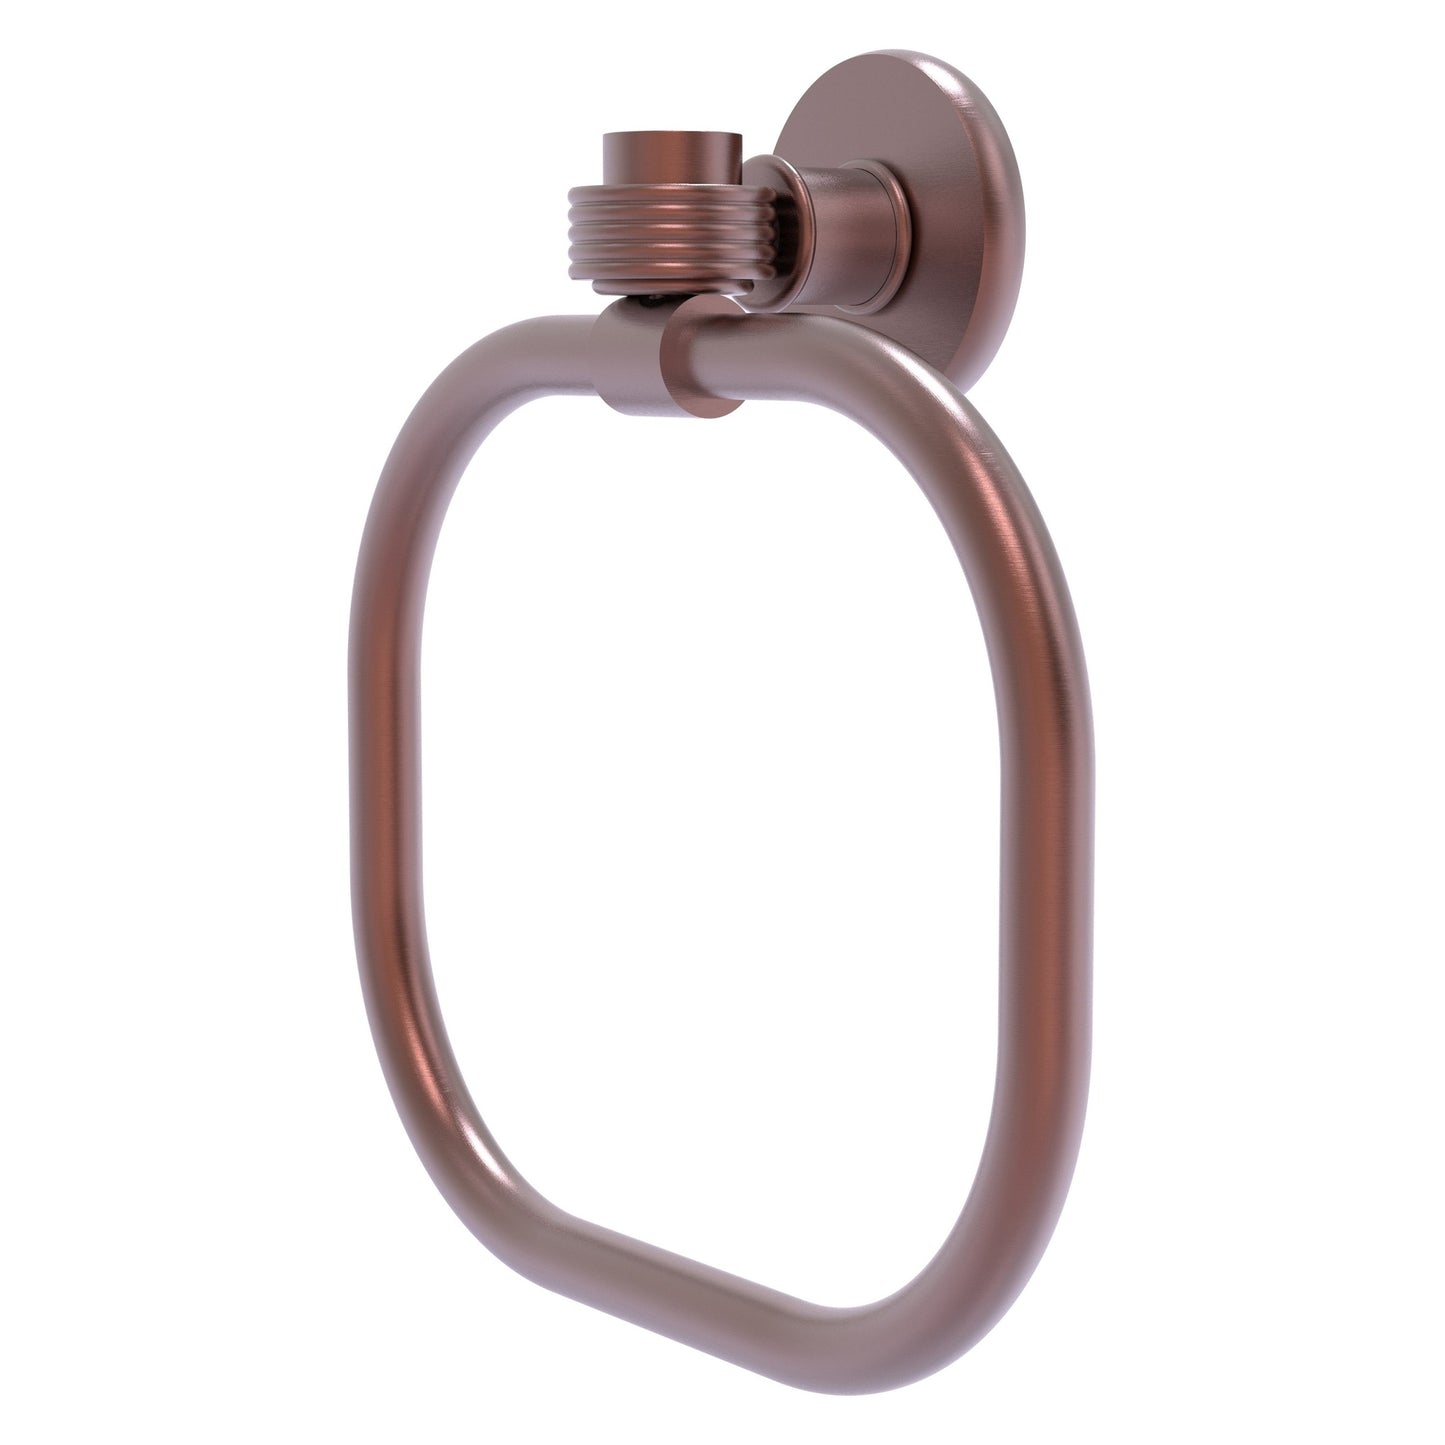 Allied Brass Skyline 2016G 9" Antique Copper Solid Brass Towel Ring With Grooved Accents